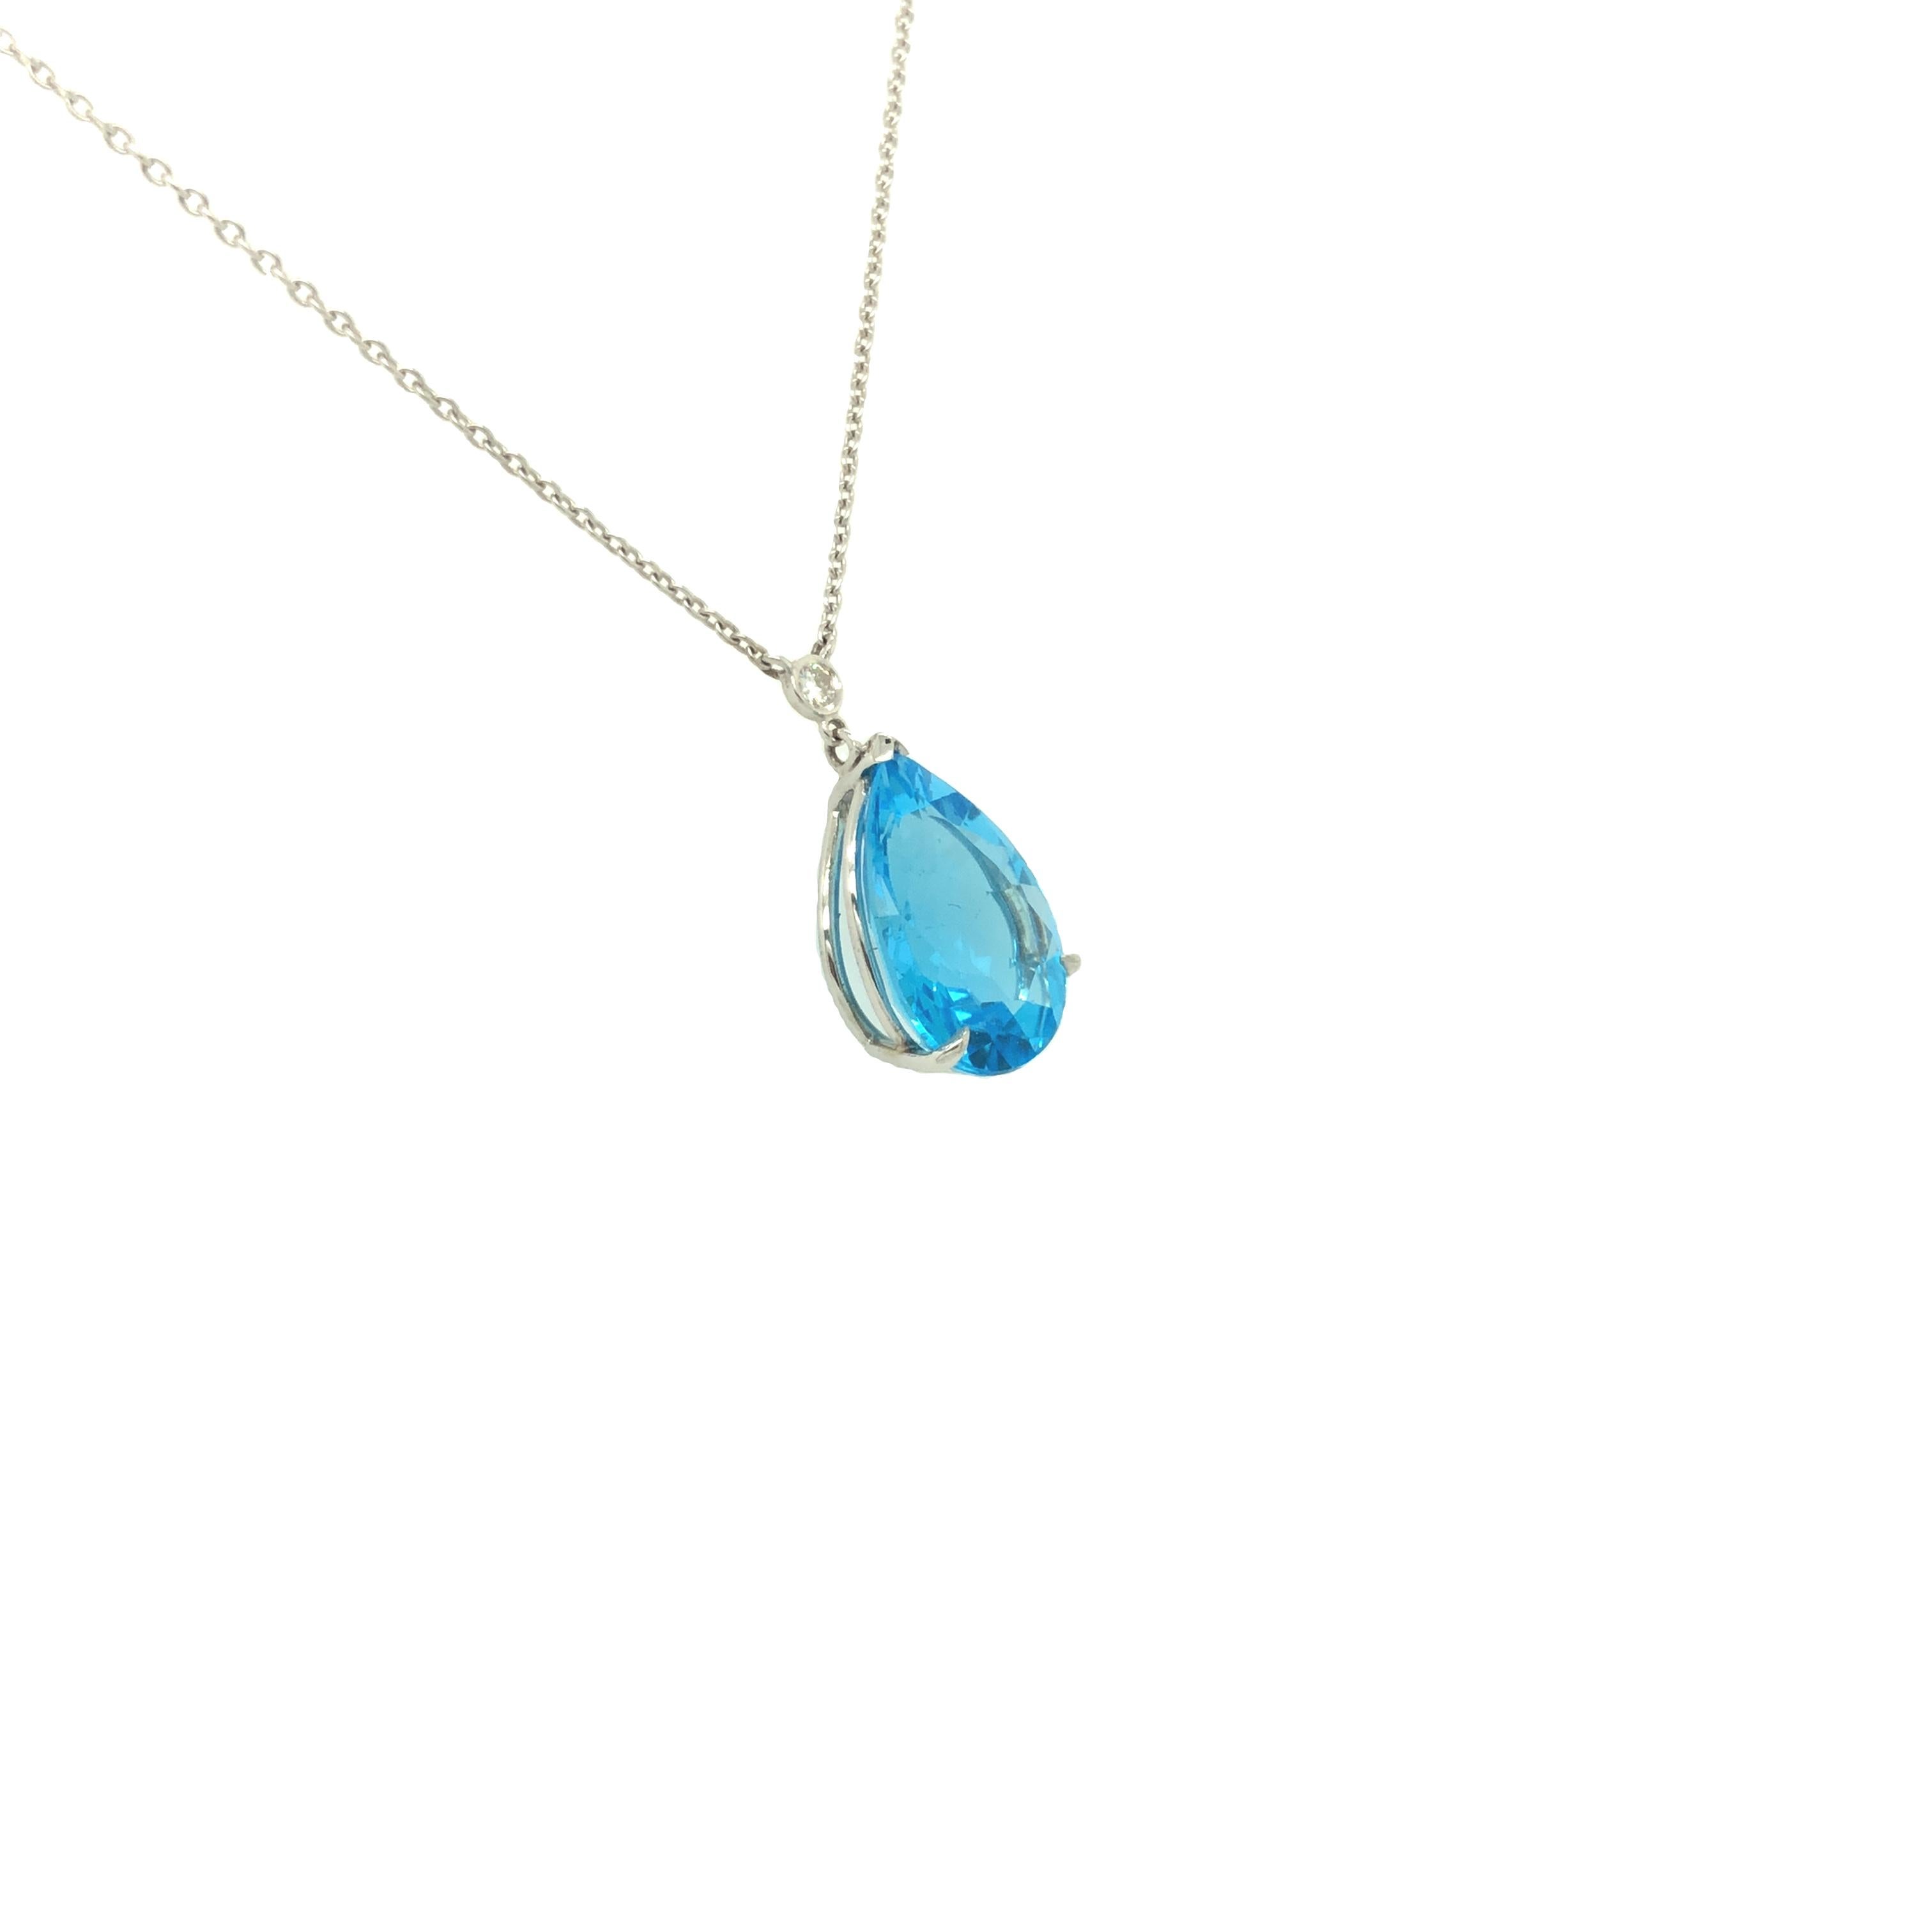 Gorgeous tear drop blue topaz set in fine claw prongs with diamond accent just above. The pendant is crafted in 14K white gold and is suspending on 16 inch long cable chain. The blue topaz weighs 8.87 carats and measures 5/8 inch long. The accent